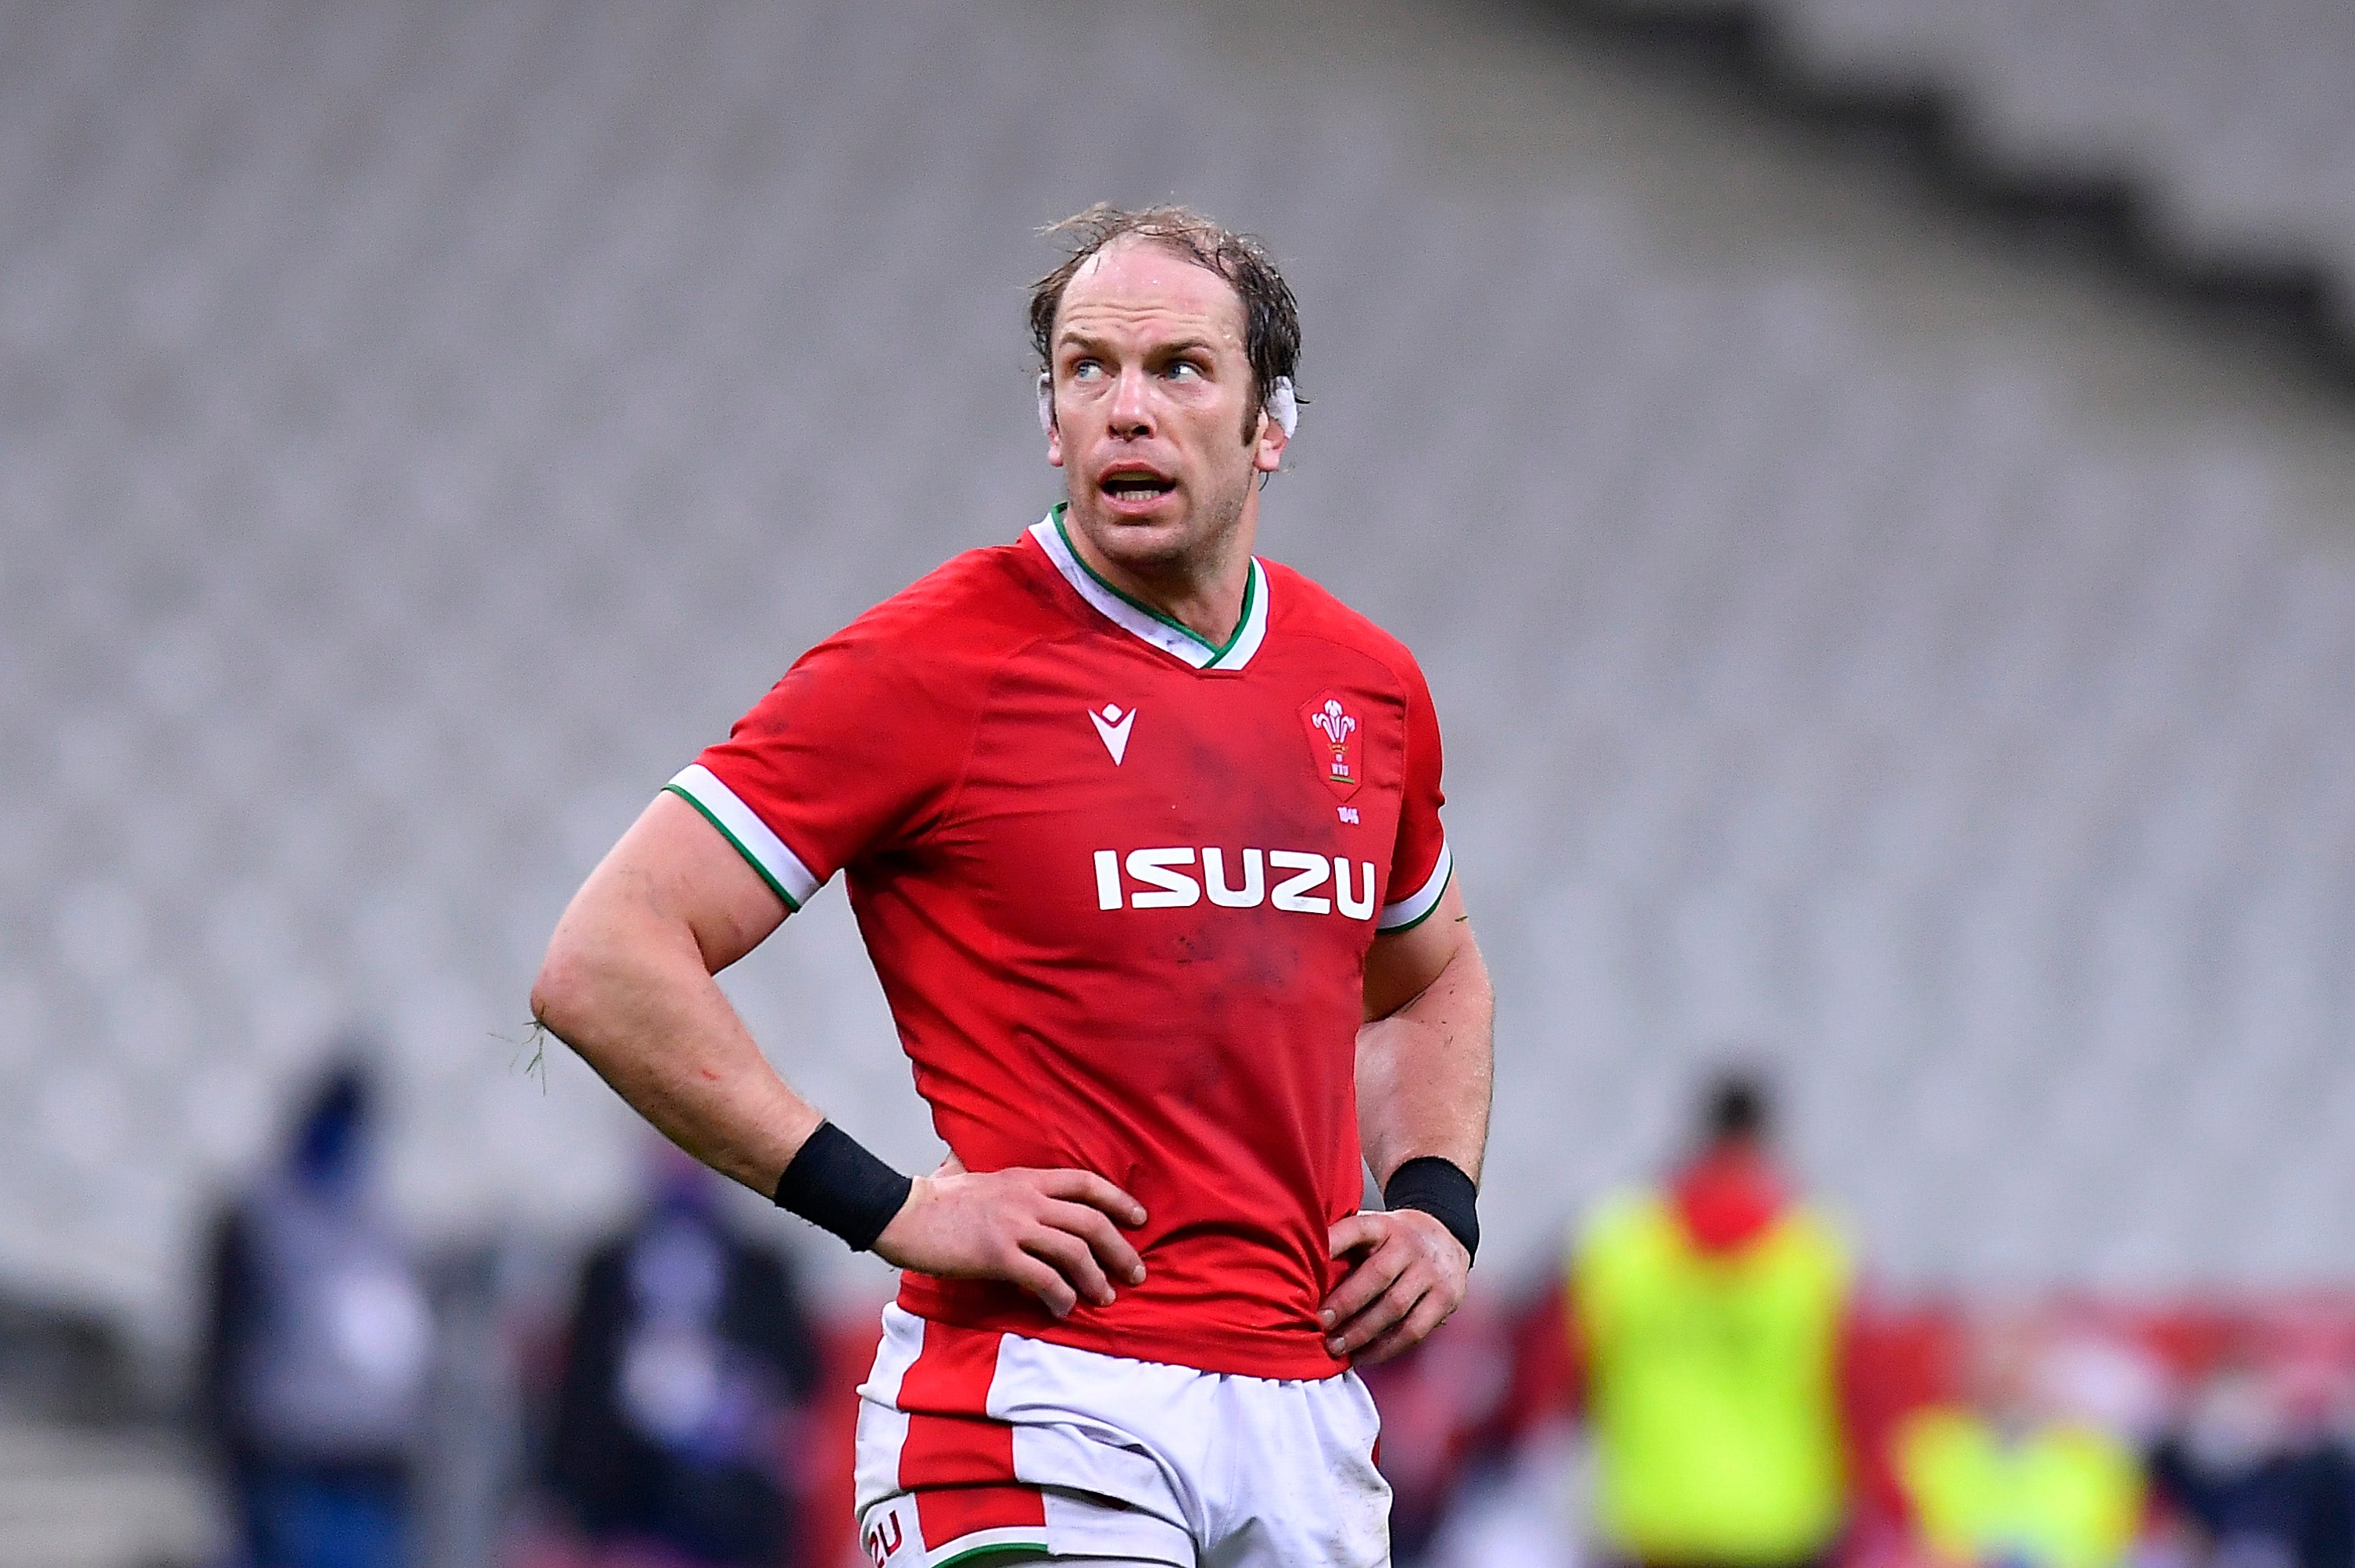 Alun Wyn Jones is set to take part in his fourth Lions tour